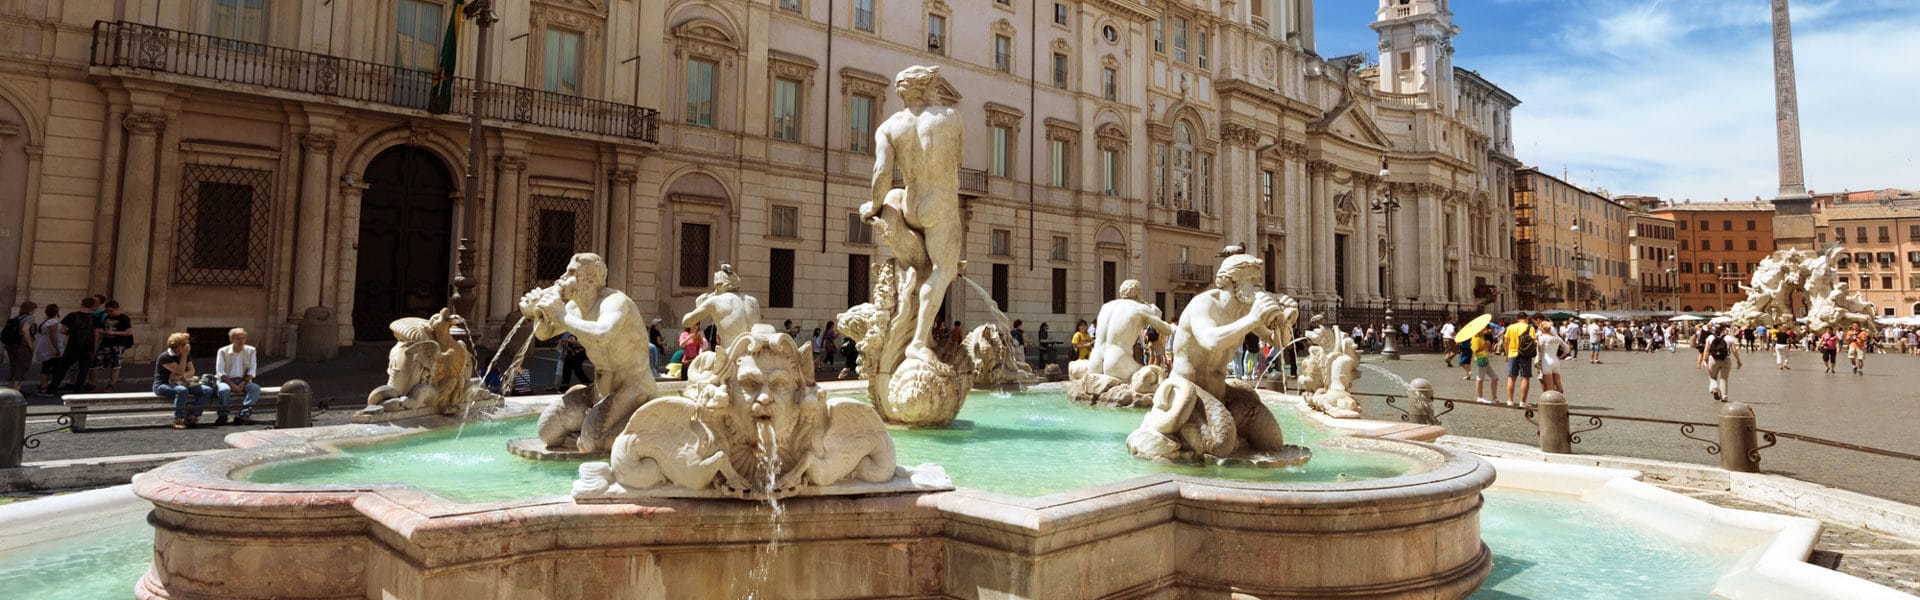 Incentive trip to Rome Trevi Fountain visit b-ceed